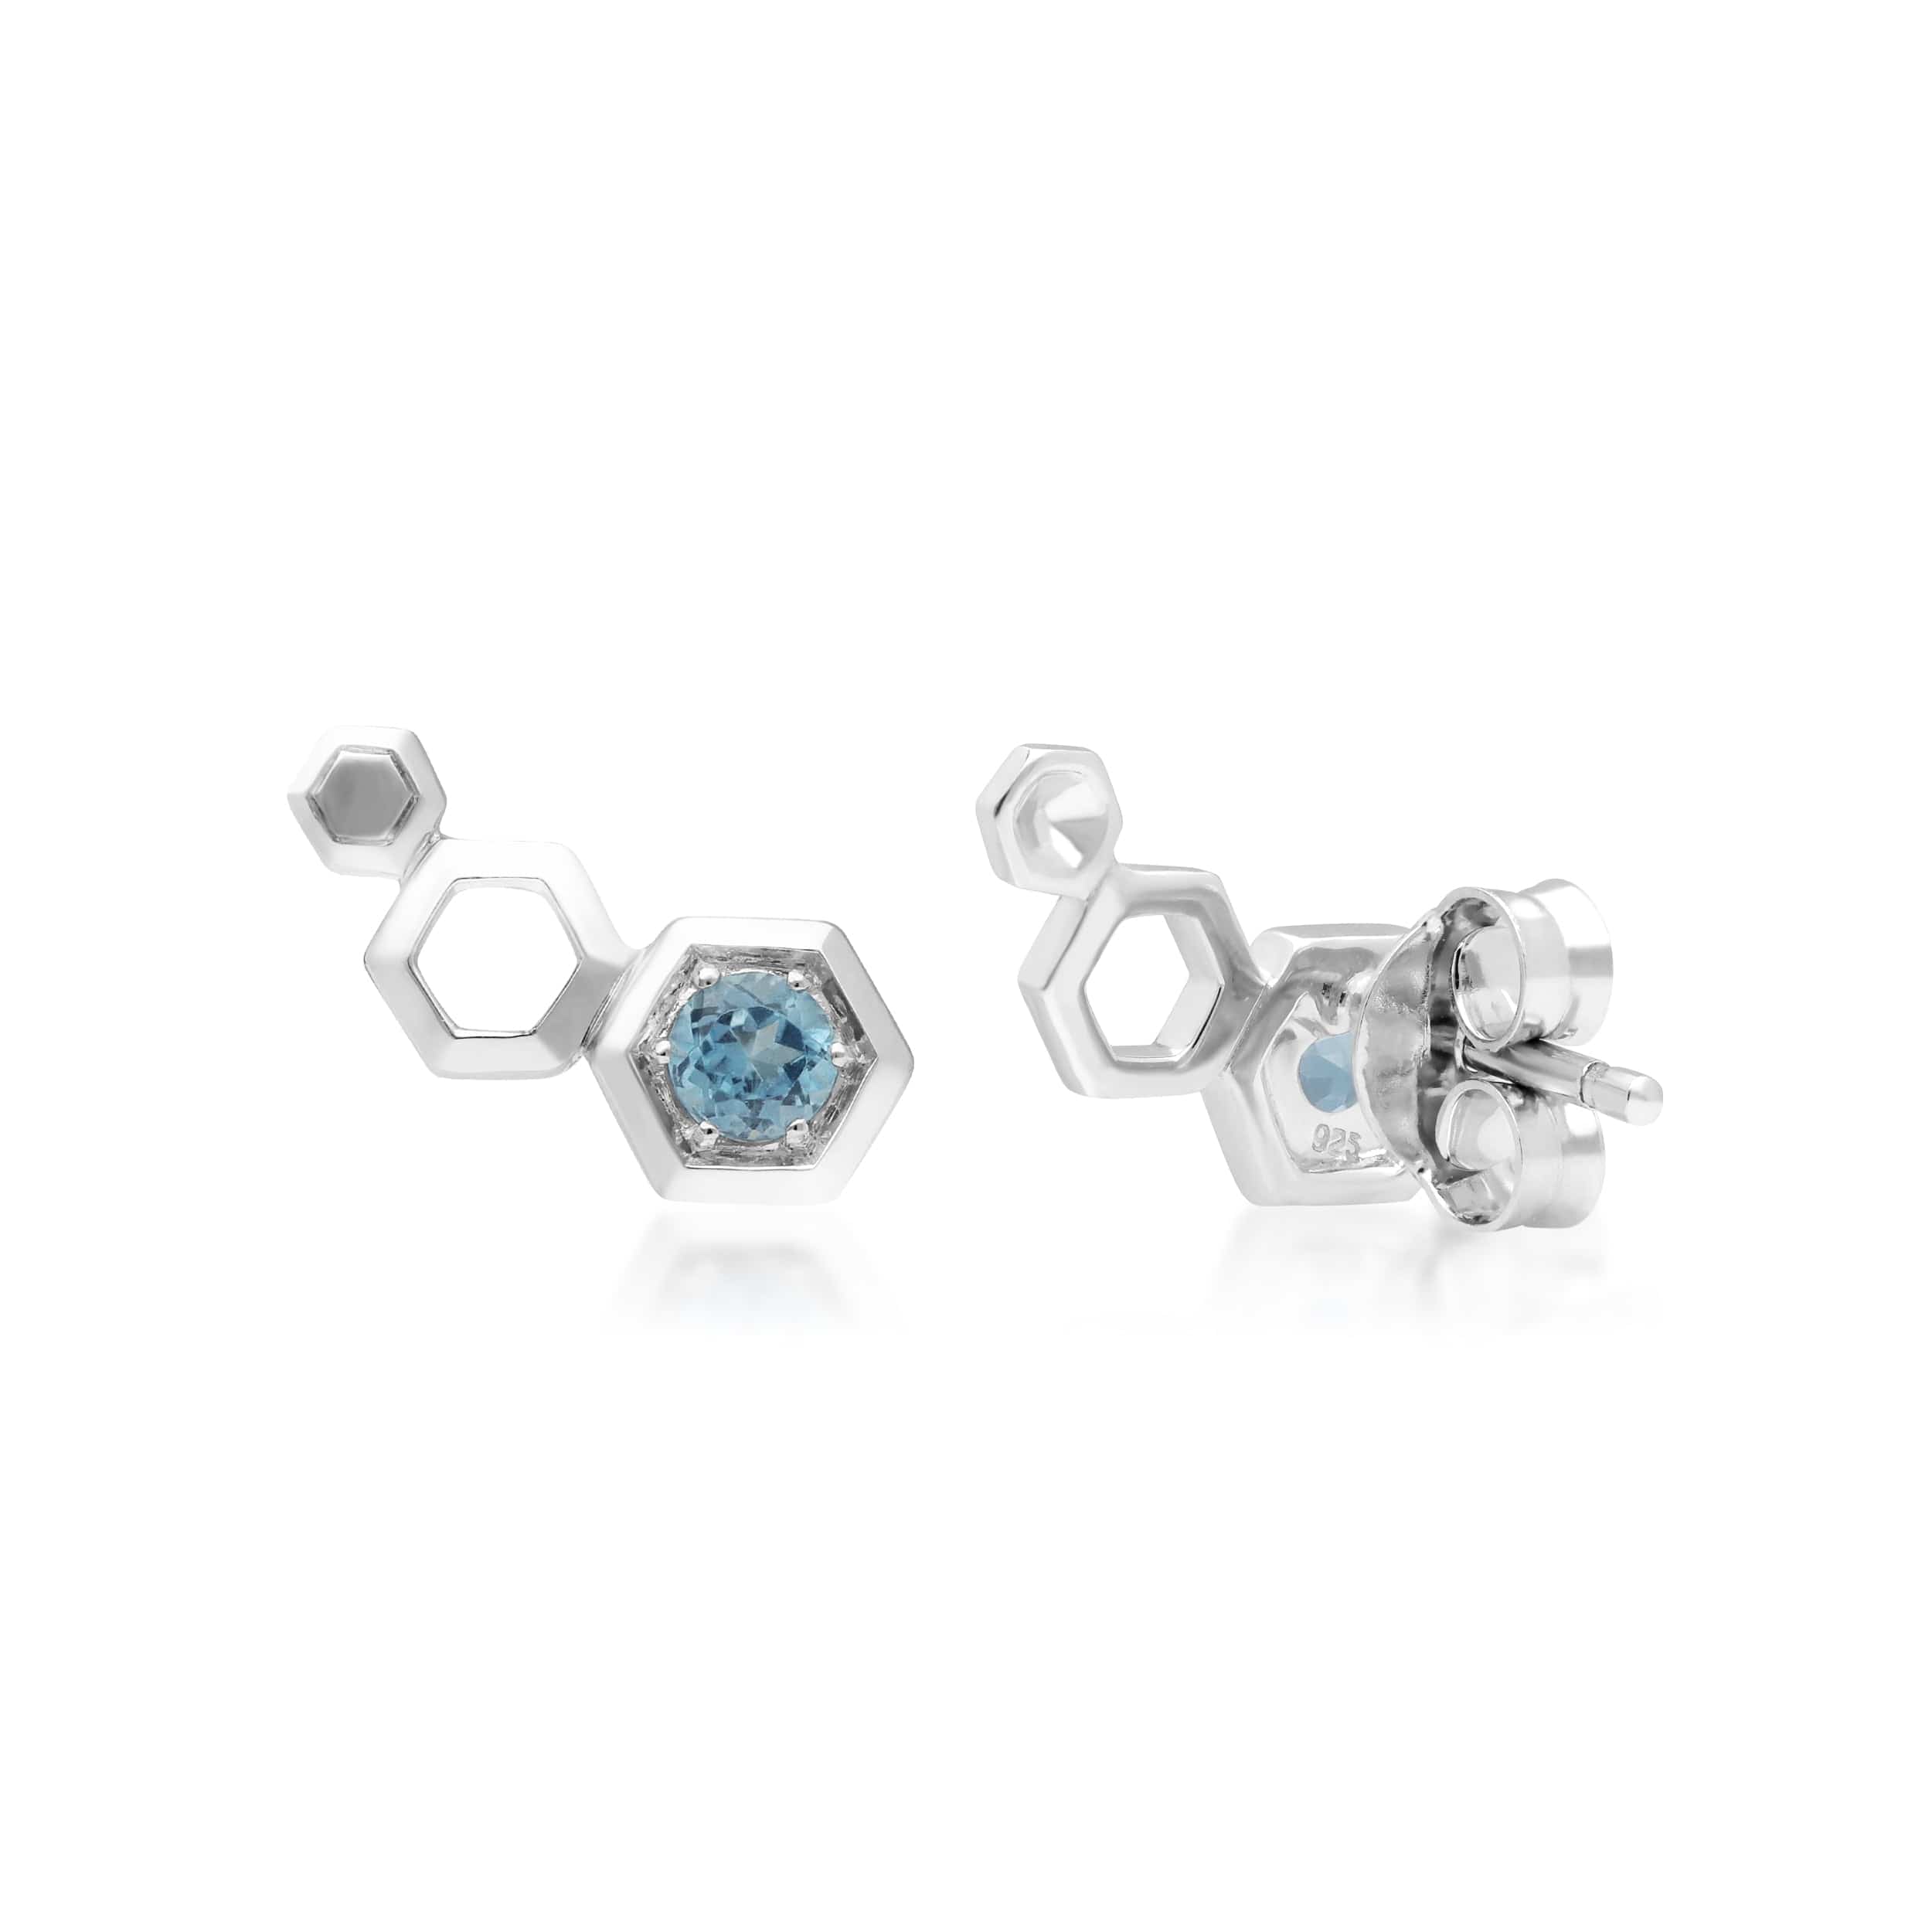 270E026701925 Honeycomb Blue Topaz Ear Climber Studs in 925 Sterling Silver 3